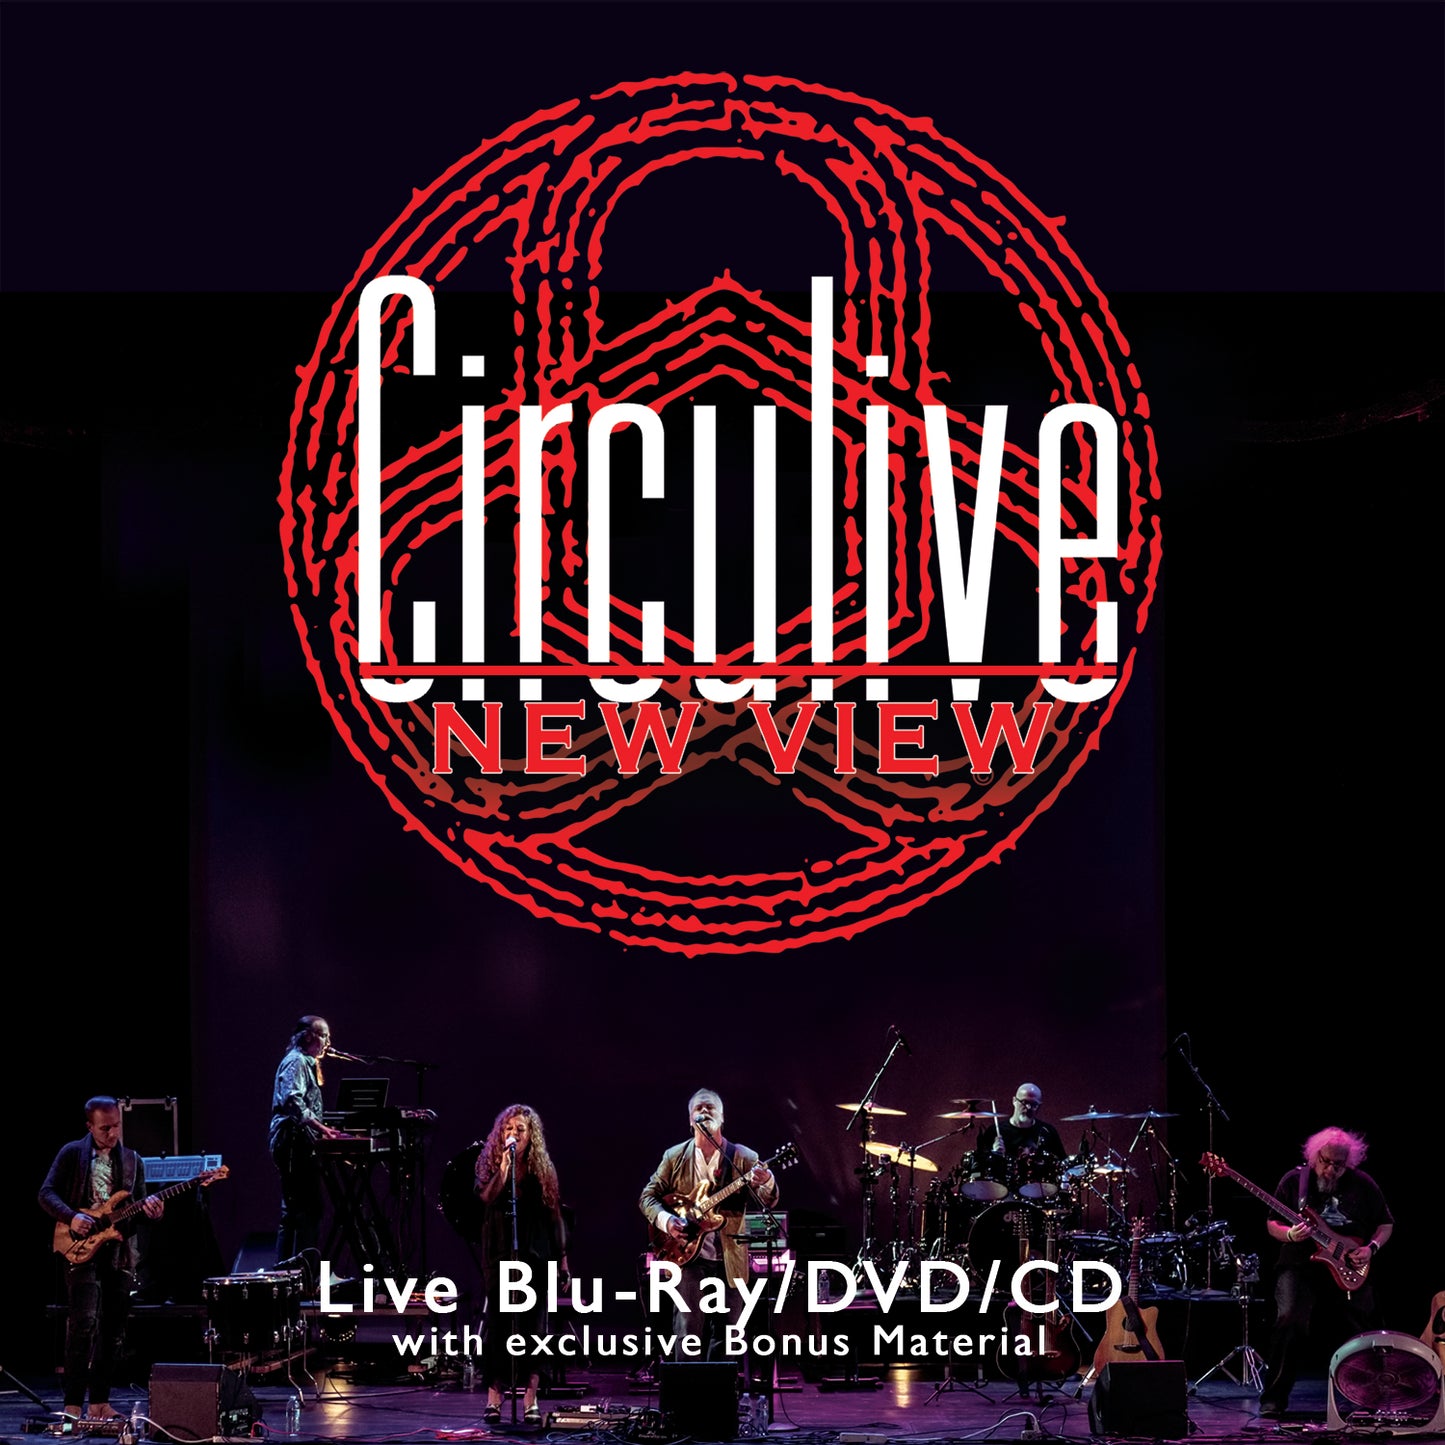 CircuLive::NewView Blu-Ray | DVD | CD